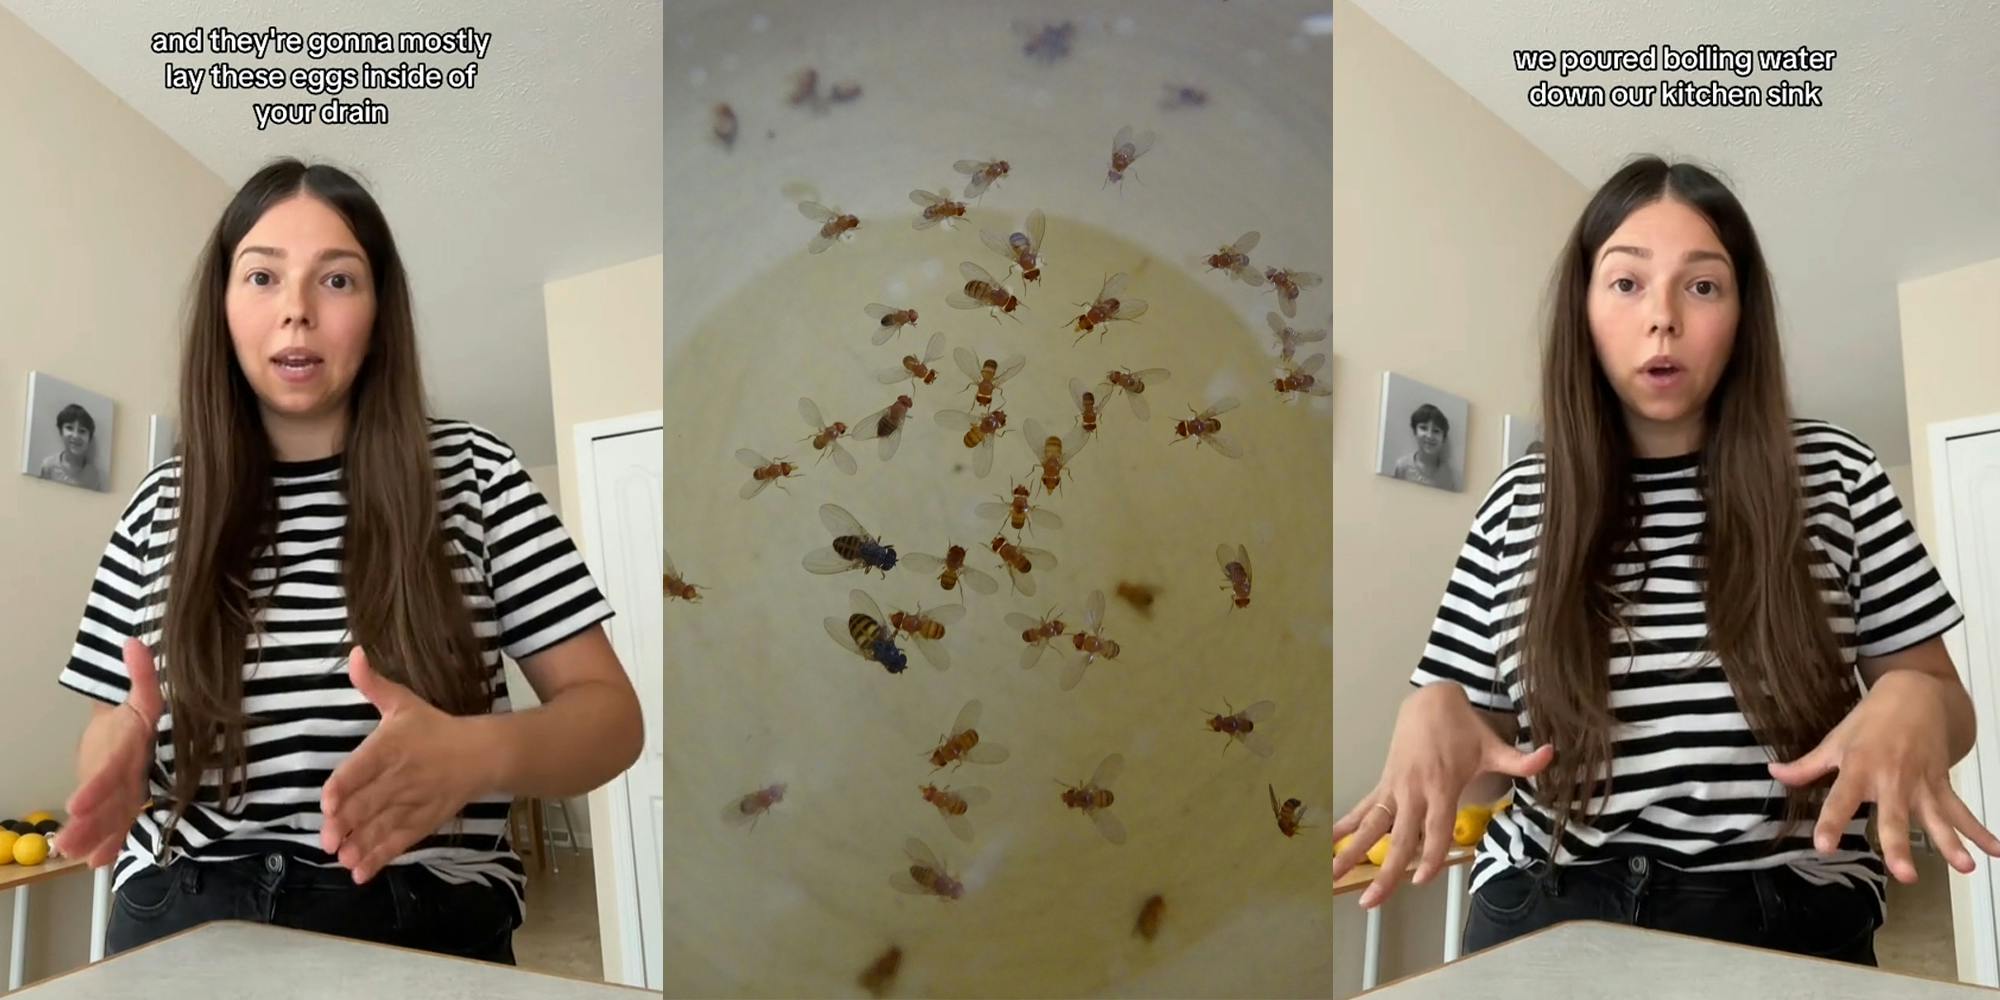 woman speaking with caption "and they're gonna mostly lay these eggs inside of your drain" (l) fruit flies in water (c) woman speaking with caption "we poured boiling water down our kitchen sink" (r)